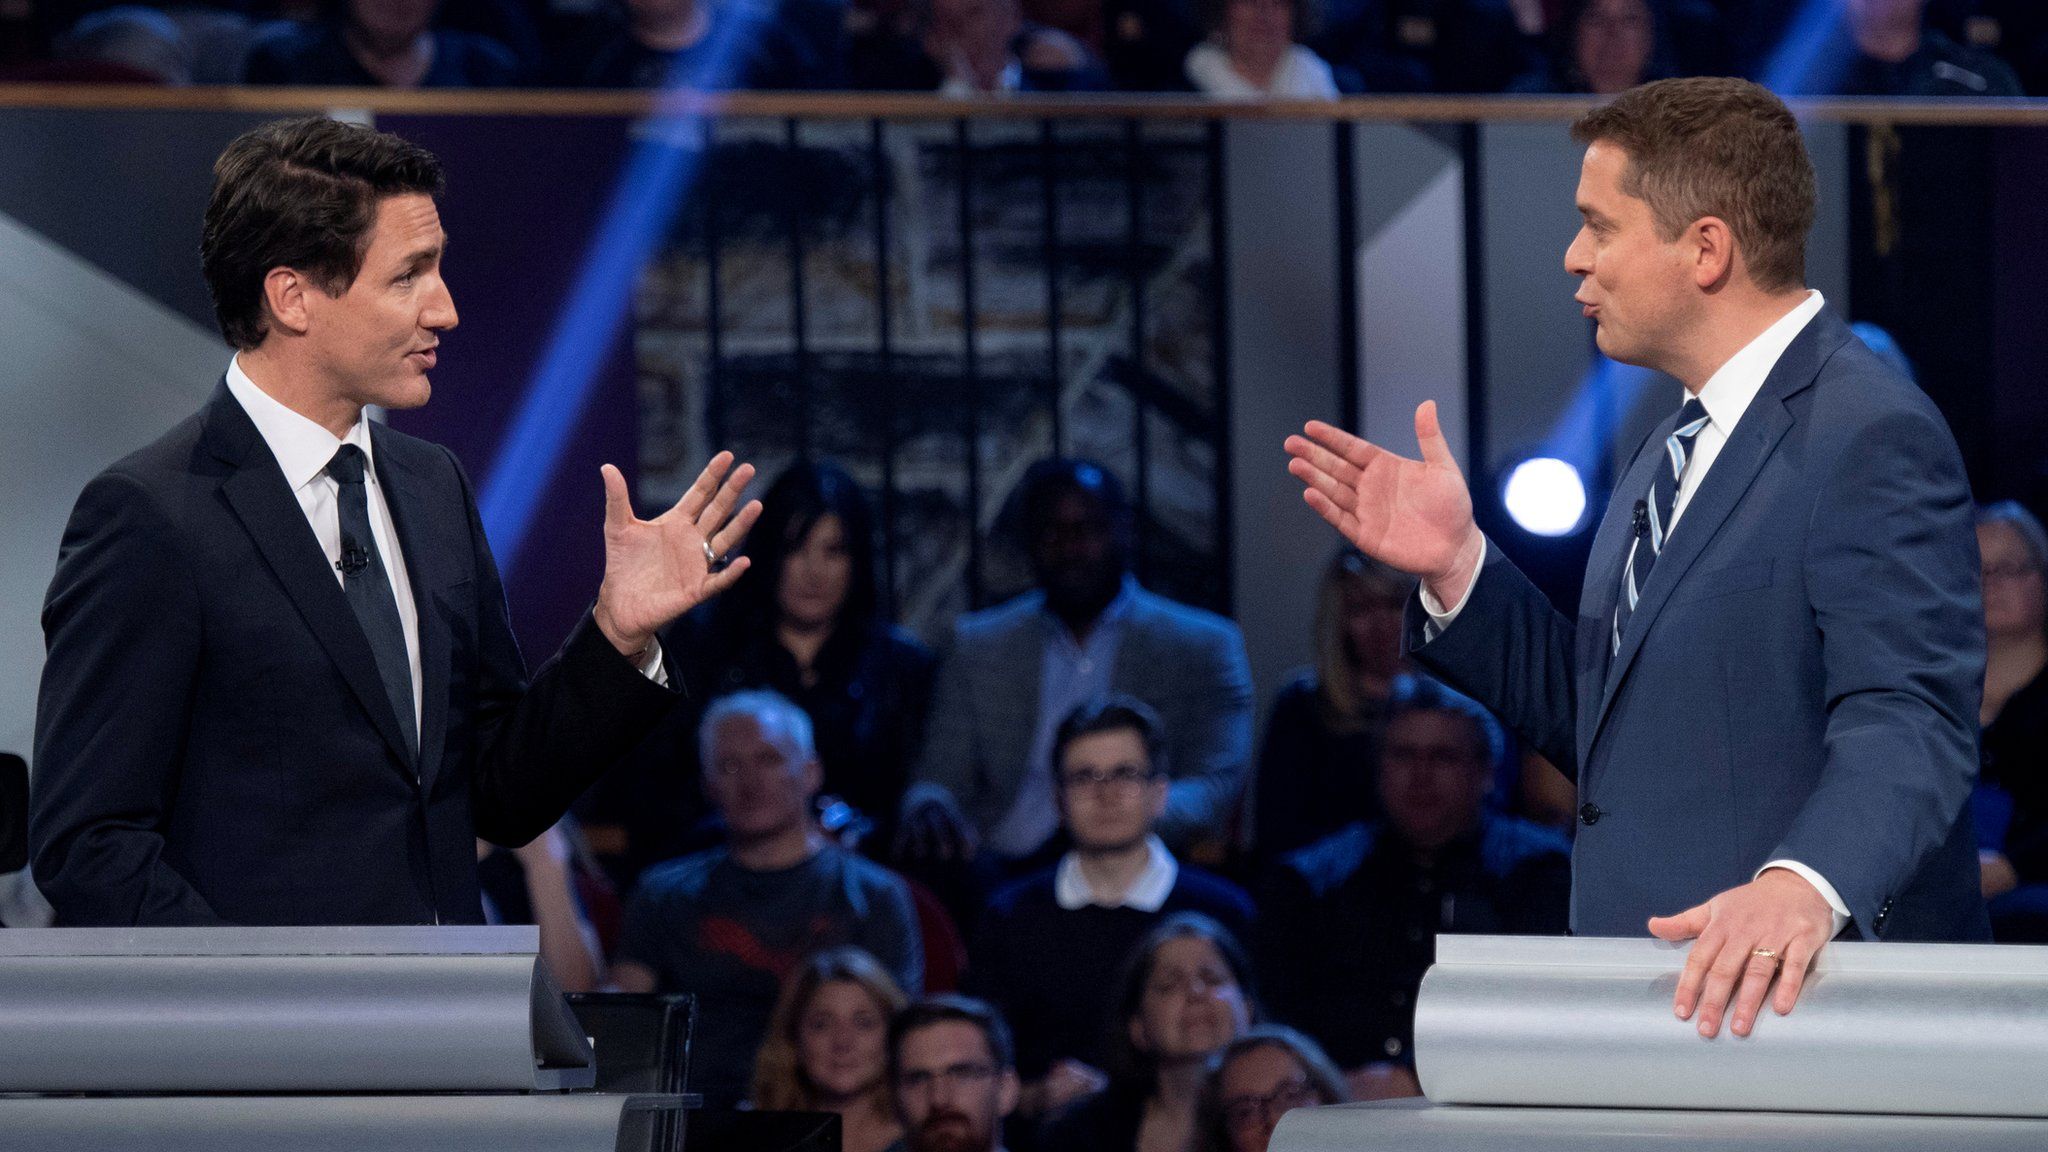 Justin Trudeau, left, and Andrew Scheer exchanging words in a televised election debate on 7 October 2019